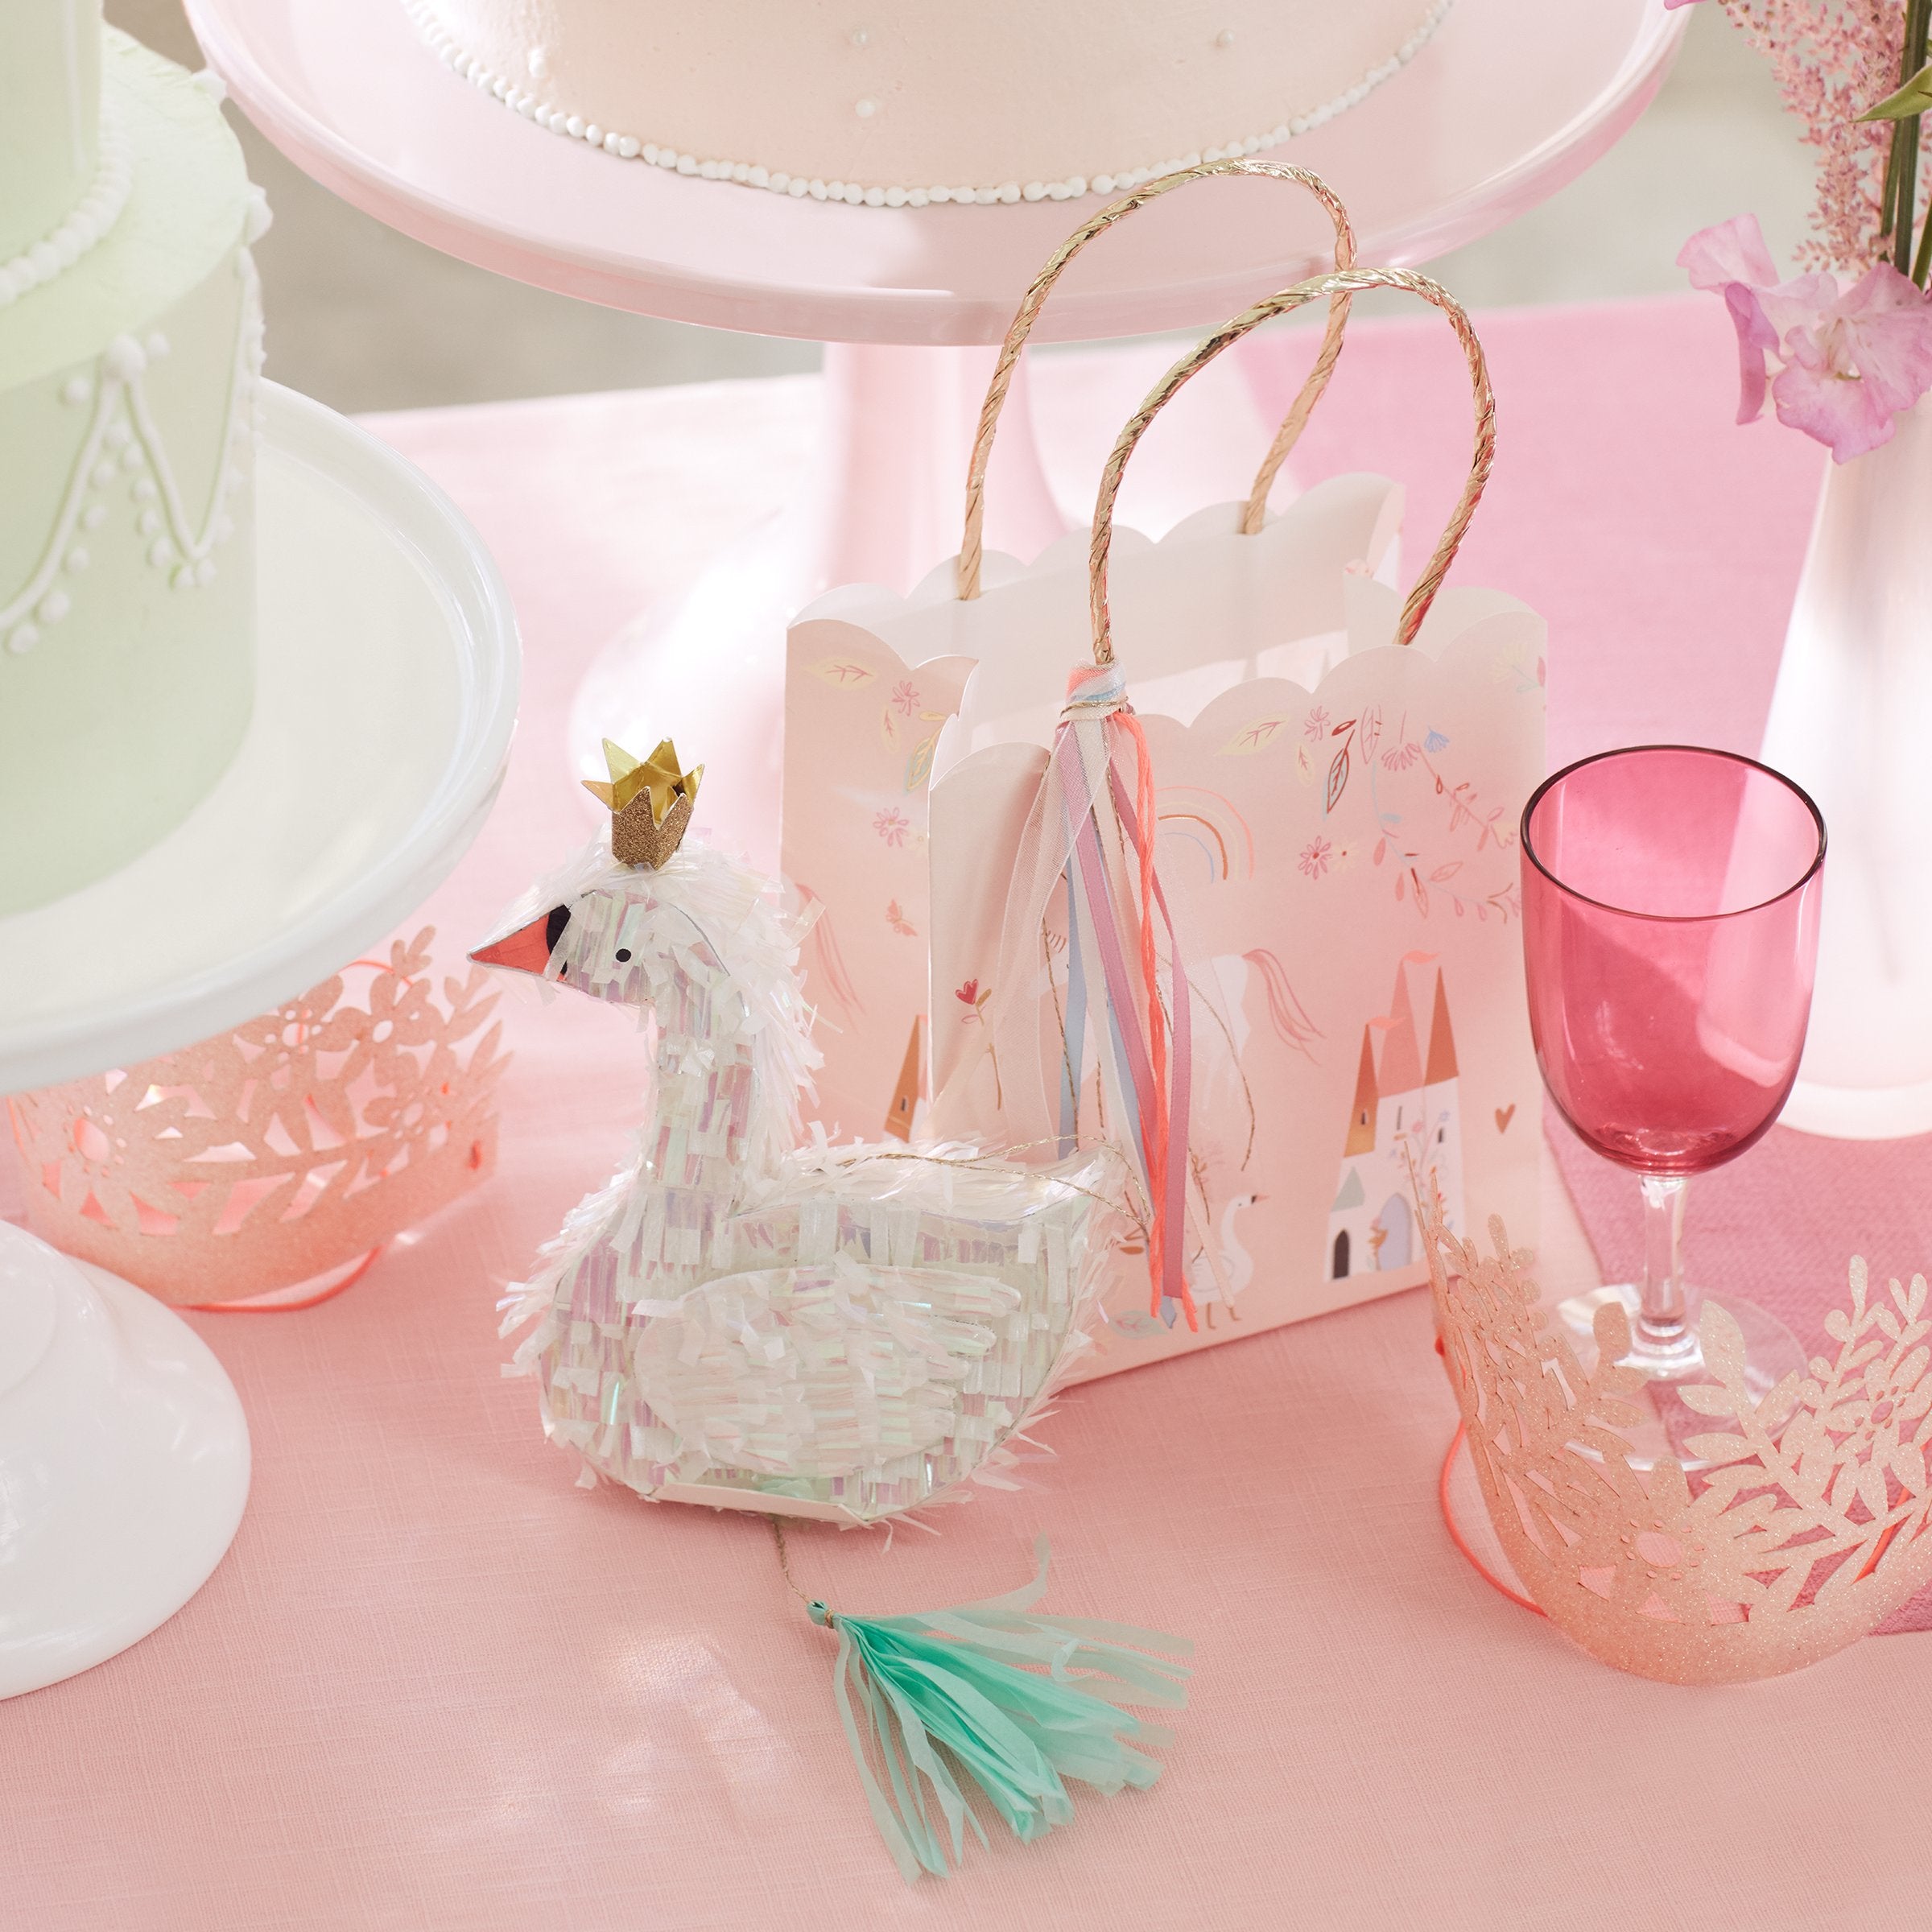 These beautiful party bags feature unicorns, swans and castles, with a scalloped edge and gold foil detail.